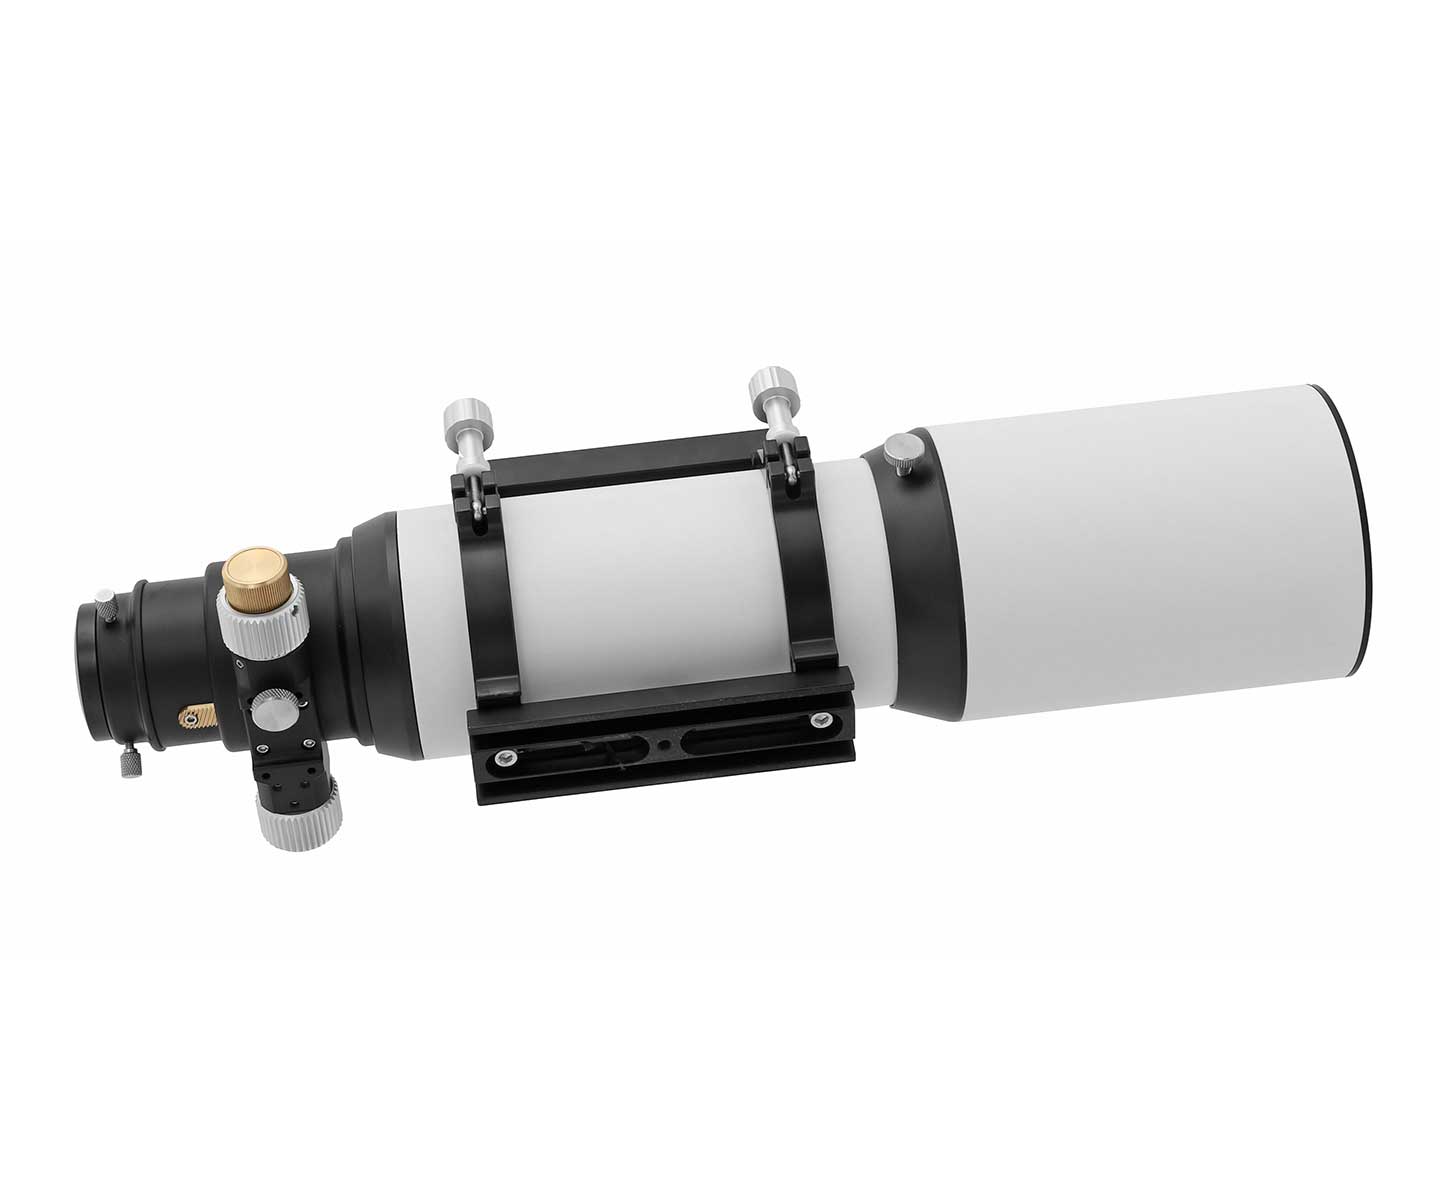  The Premium ED apo with 96 mm aperture and fast f/6 is a transportable telescope for astrophotography and observation [EN] 